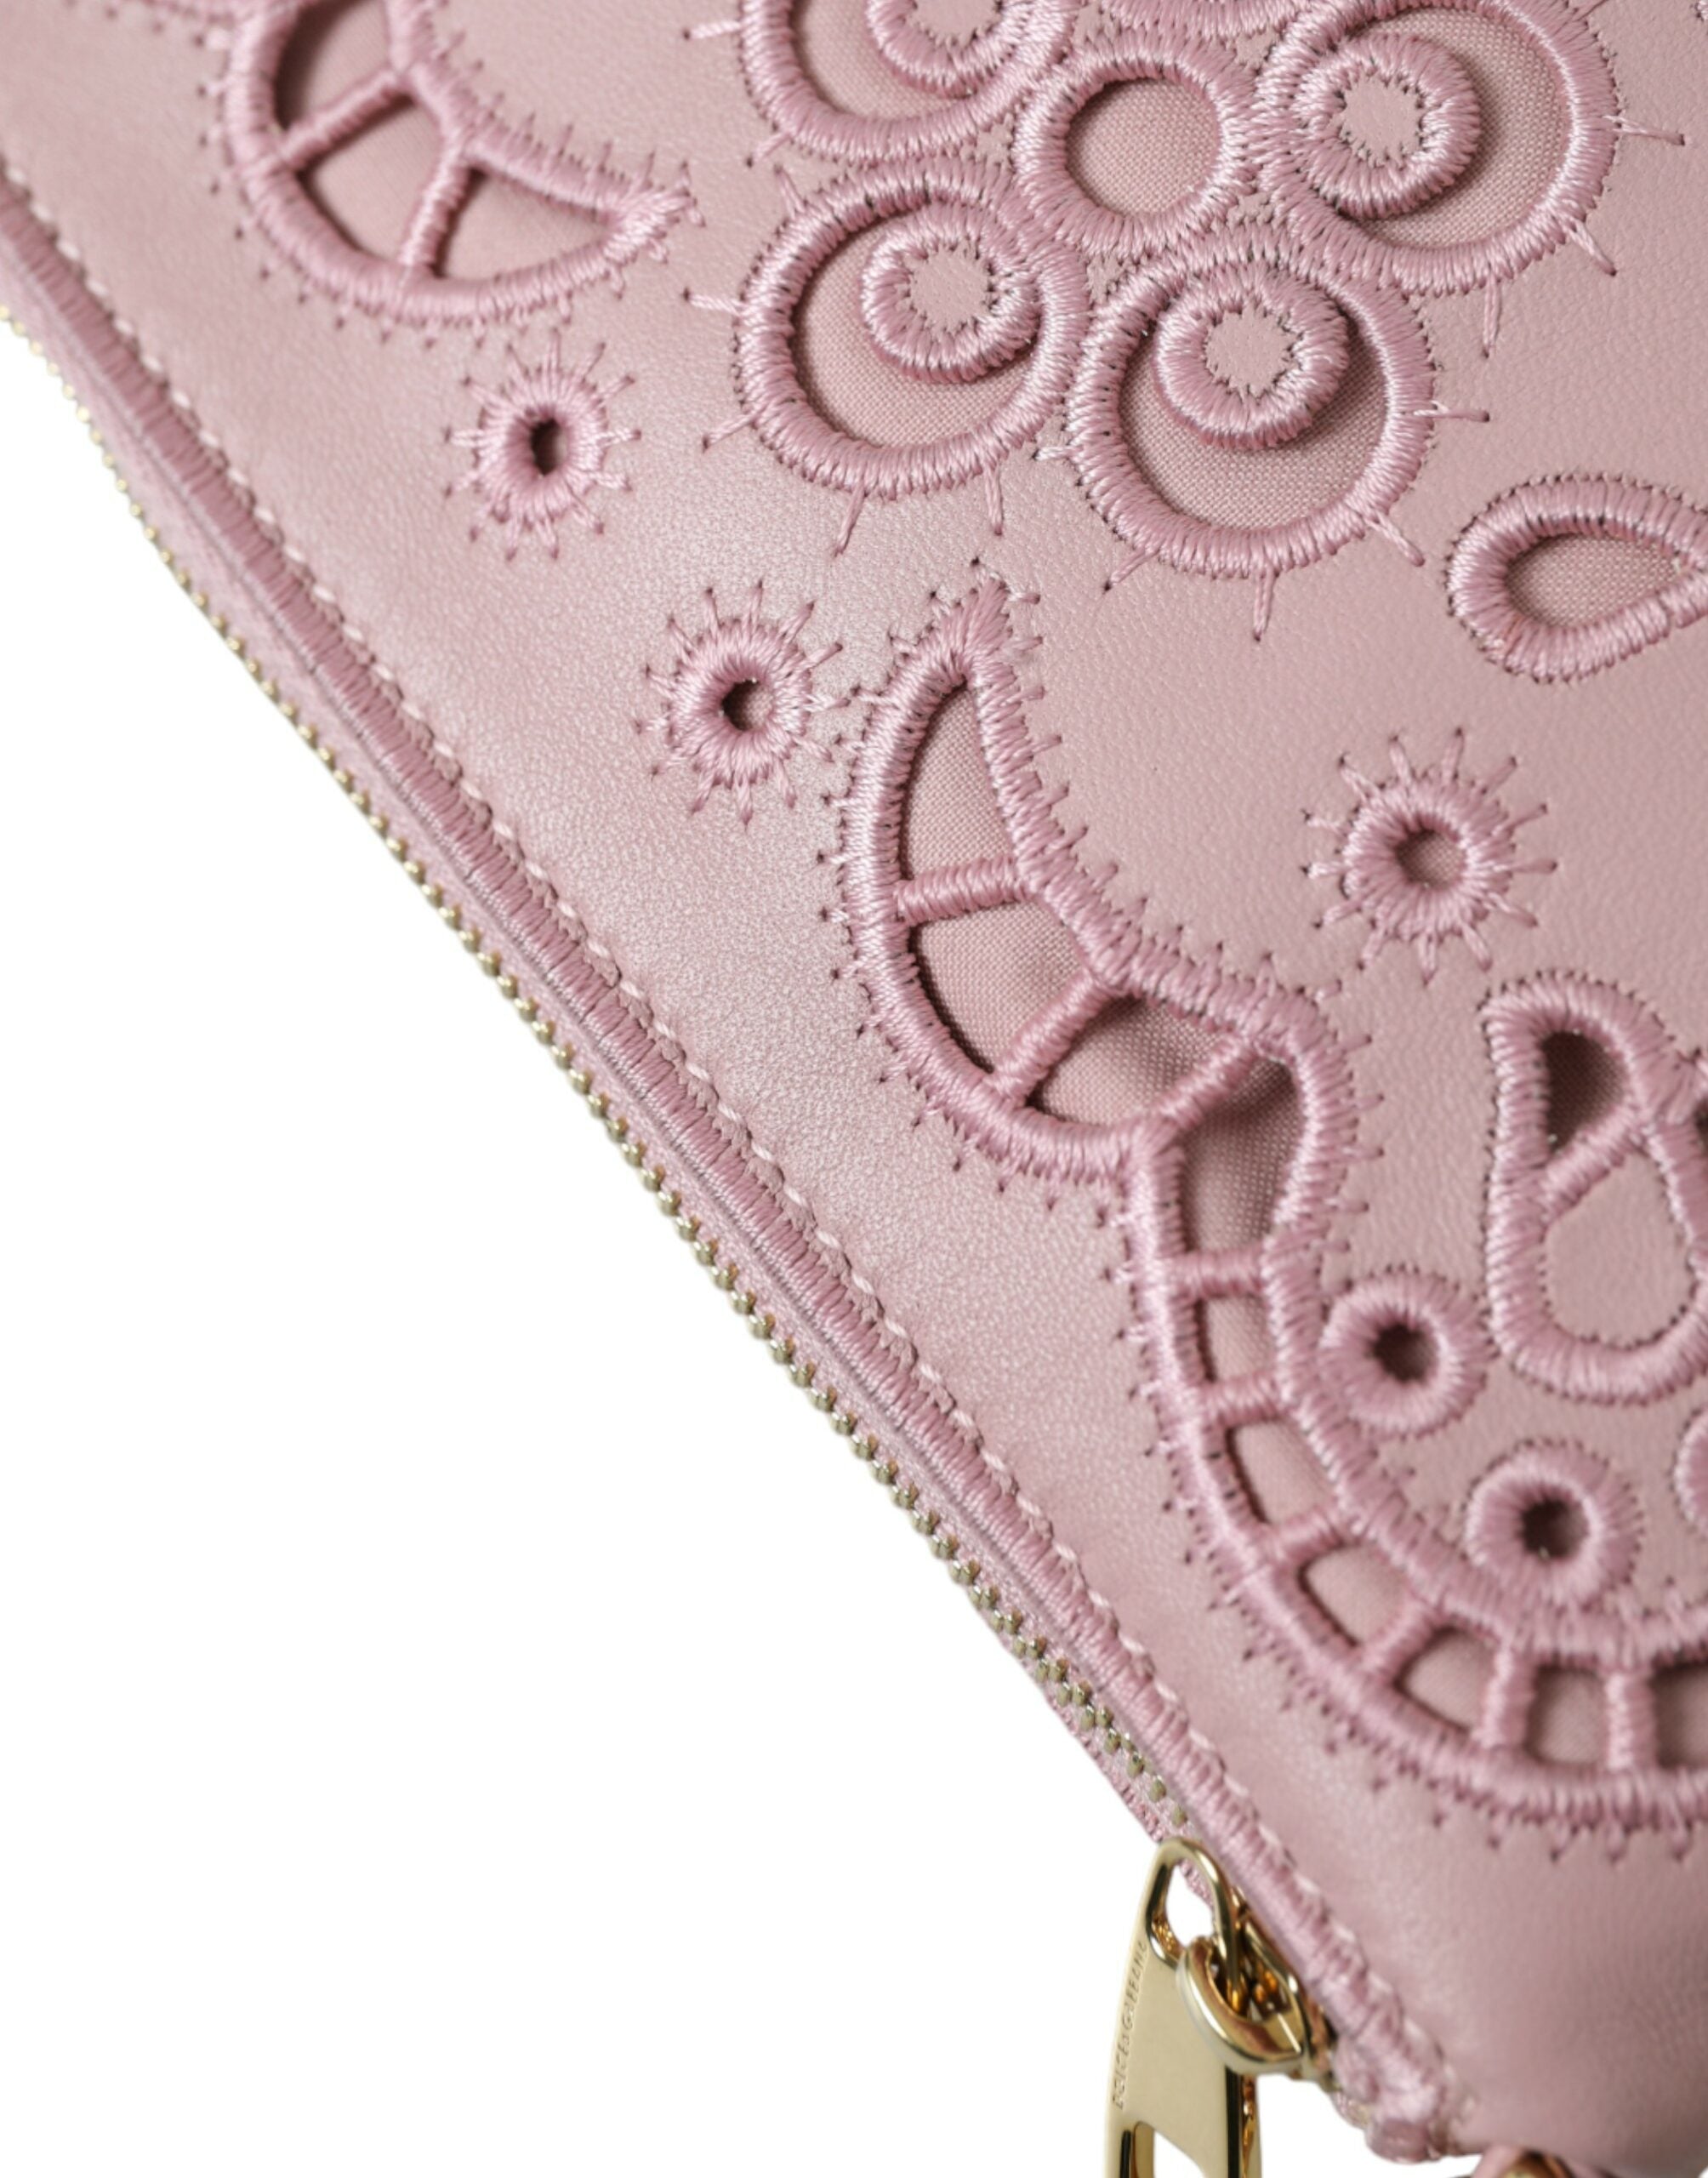 Dolce & Gabbana Elegant Pink Leather Pouch Clutch with Floral Embroidery